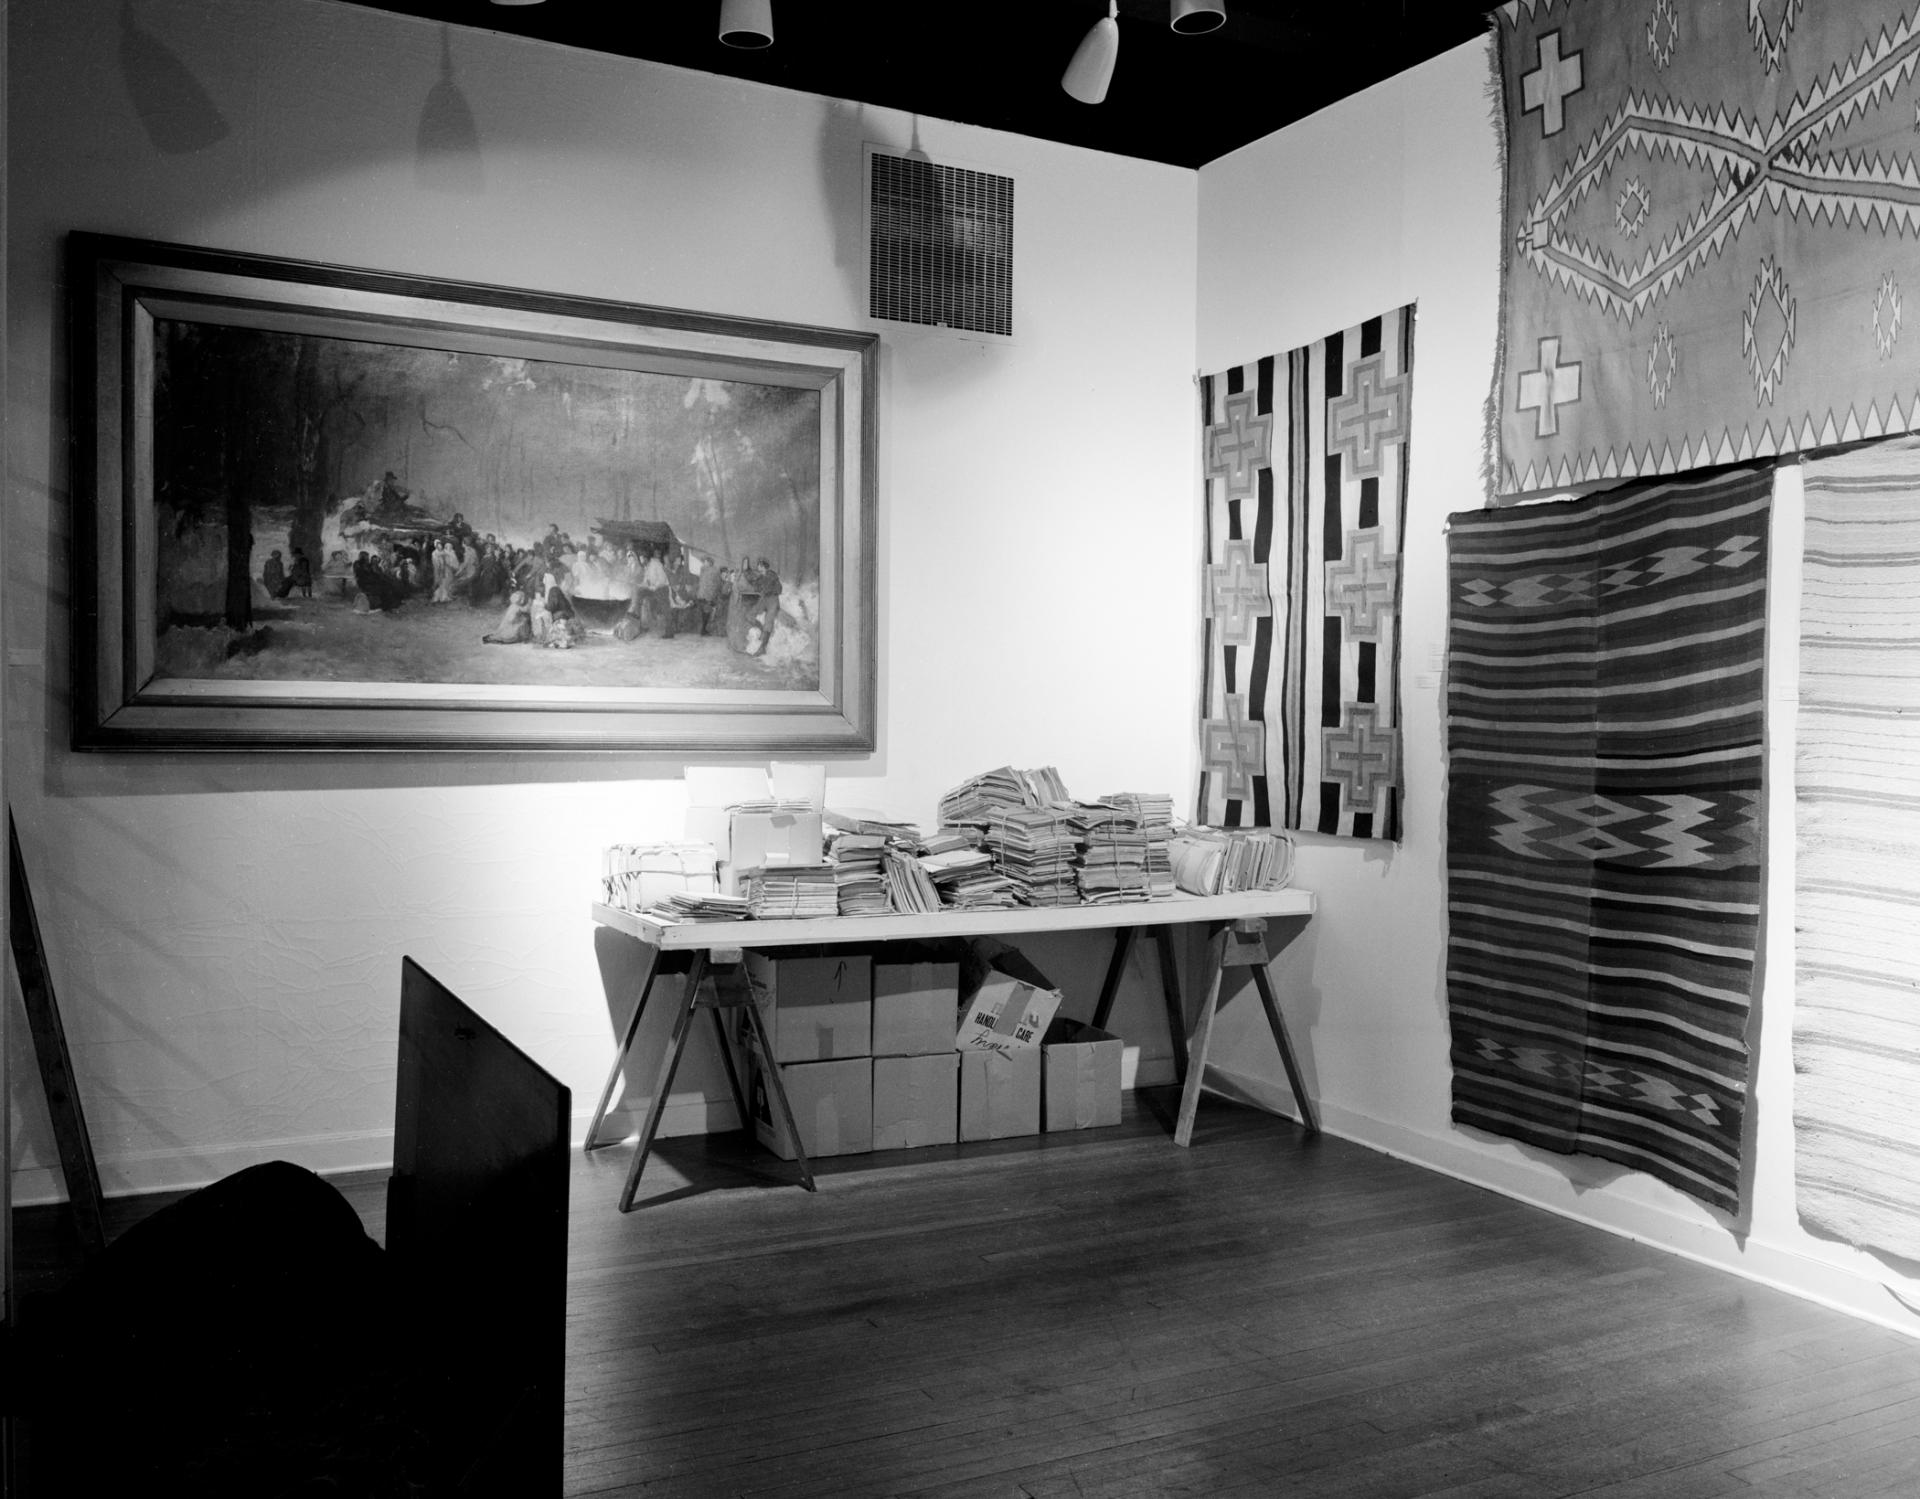 Installation photograph of Raid the Icebox 1 with Andy Warhol, RISD Museum, 1970. Courtesy of RISD Archives.